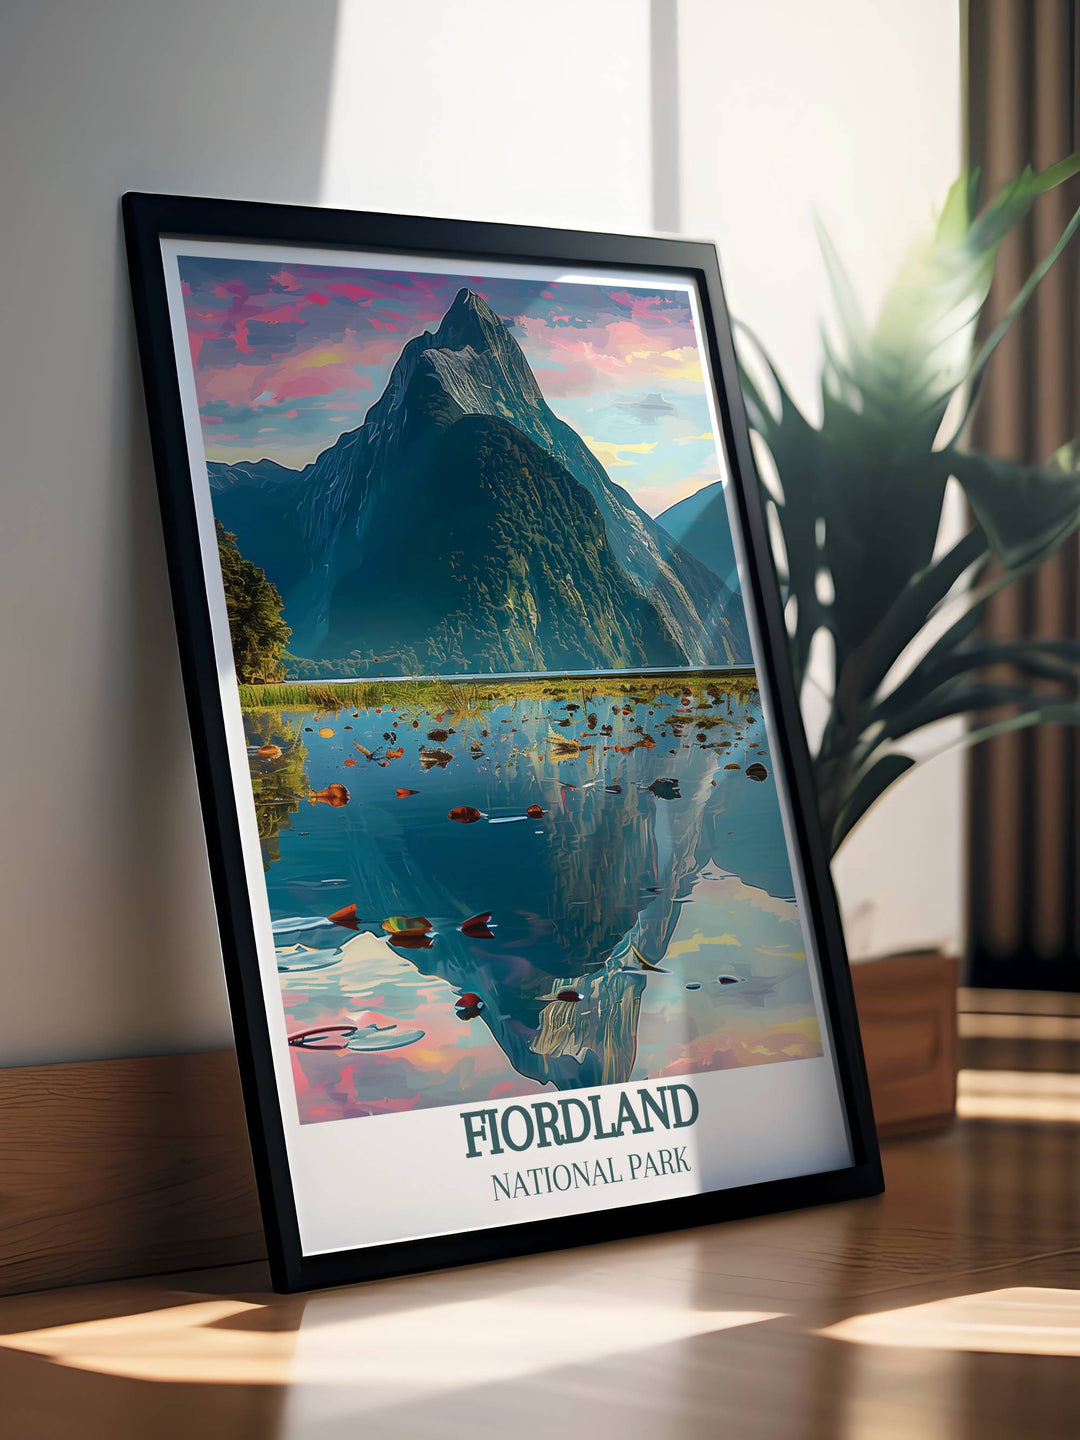 A vibrant daylight view of Mitre Peak with clear blue skies and lush surroundings, captured in a detailed print that celebrates New Zealands natural beauty.